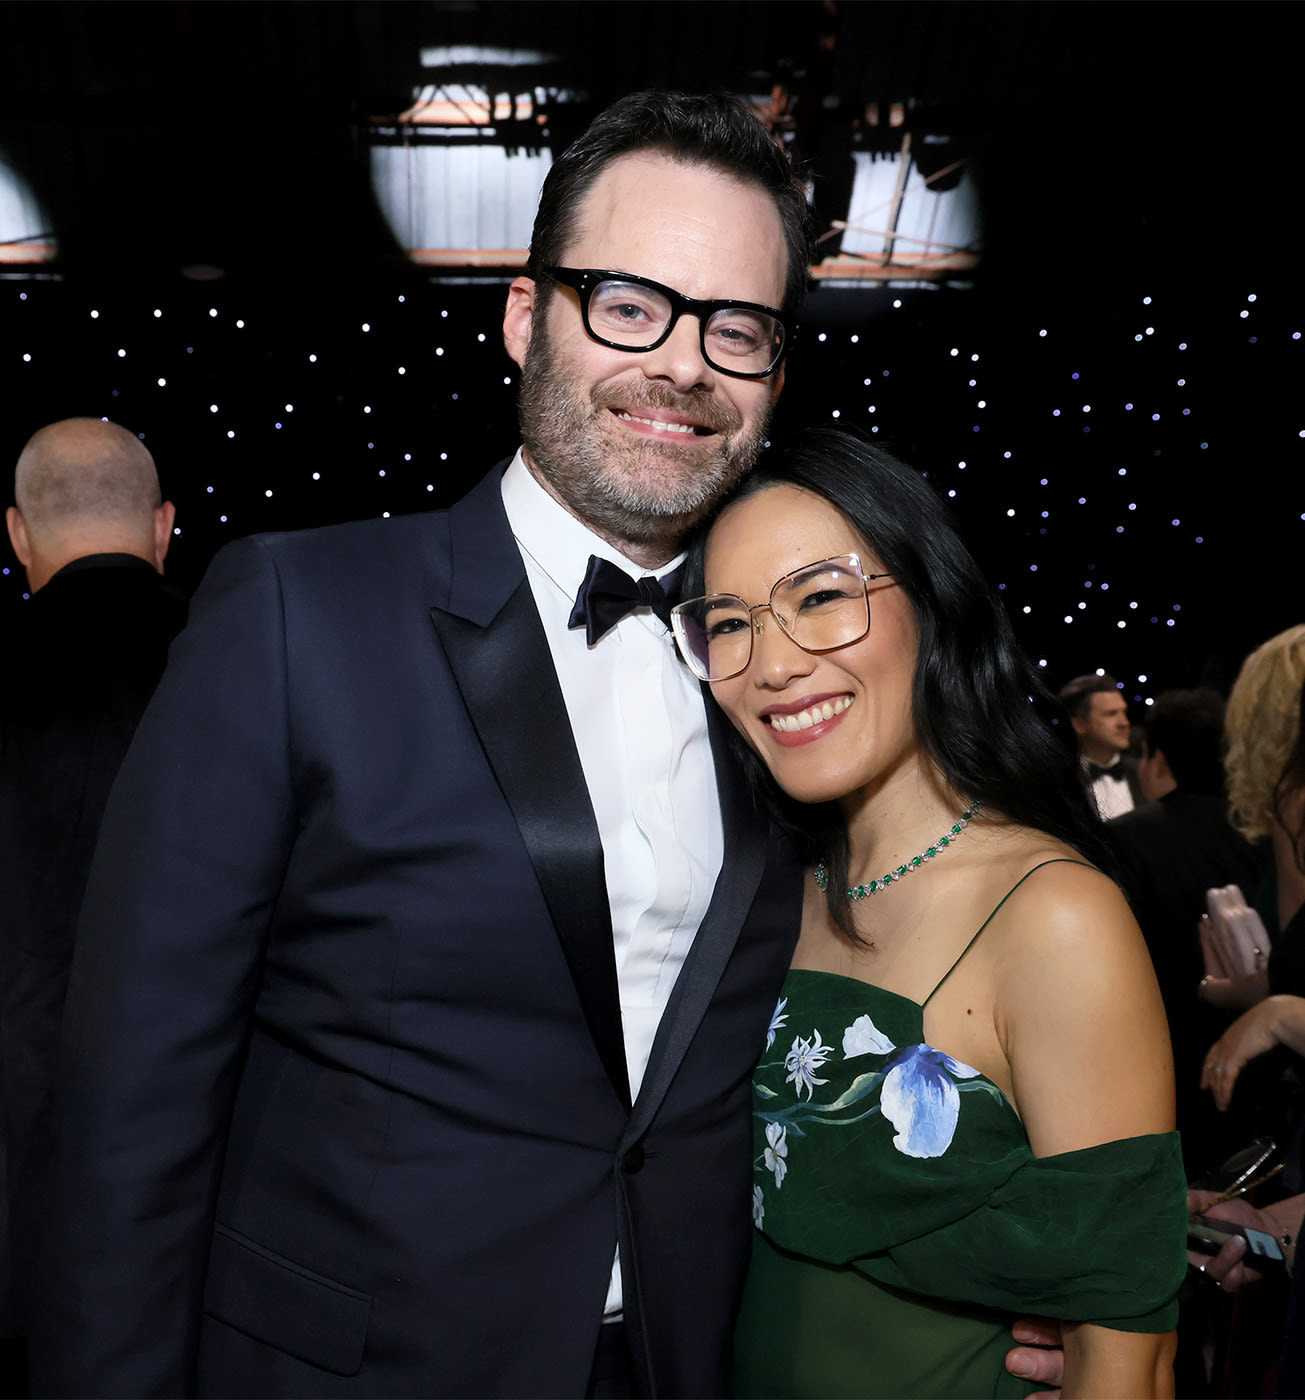 Bill Hader Declares Girlfriend Ali Wong is ‘Off the Market’ at Her Comedy Show